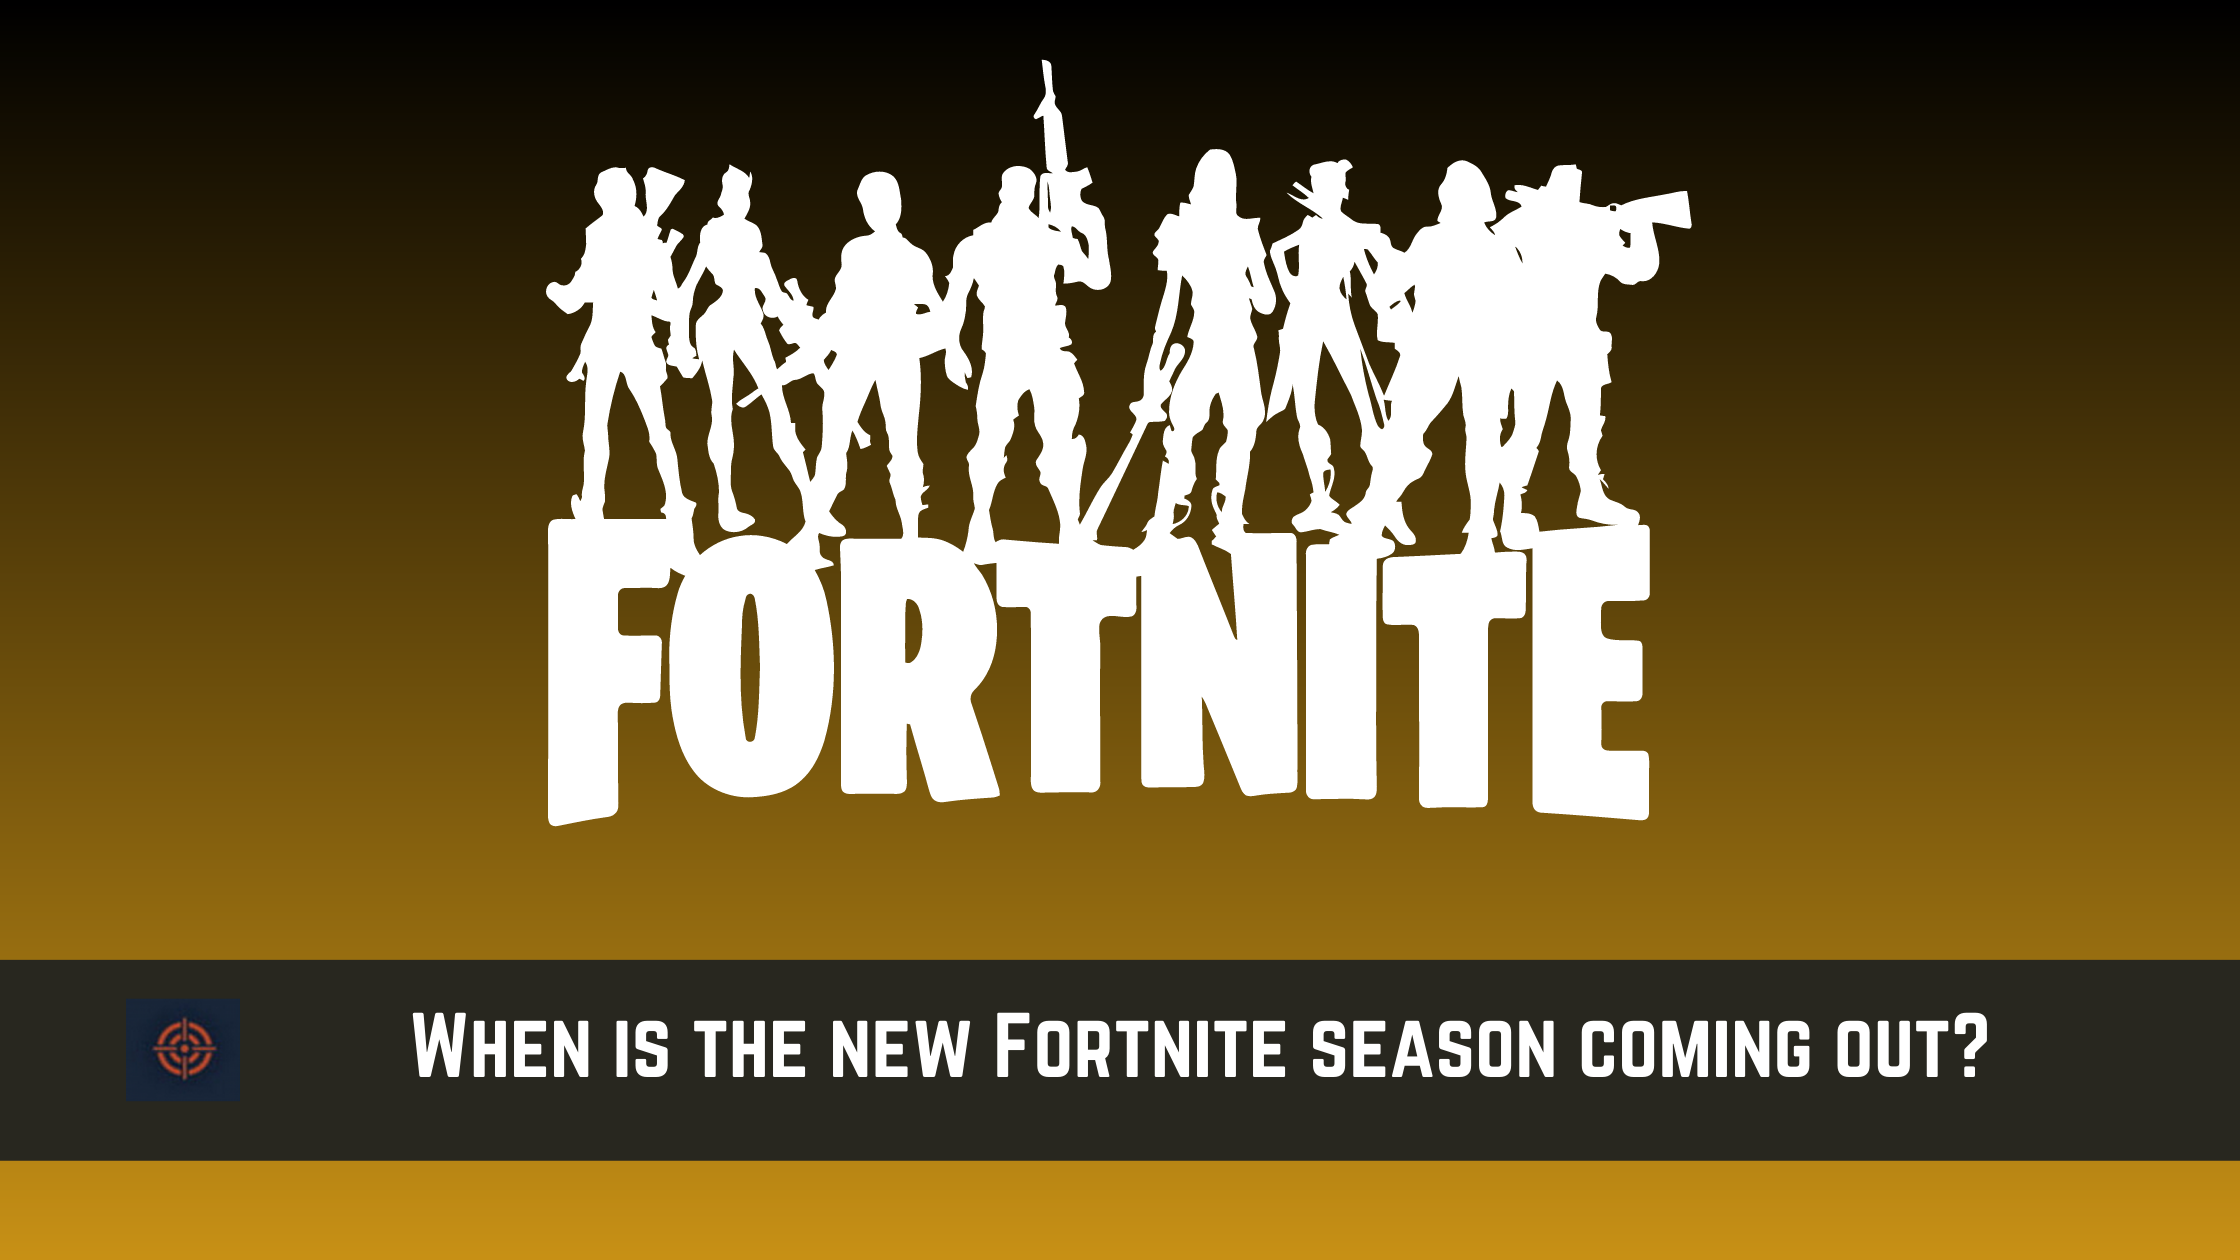 When is the new Fortnite season coming out